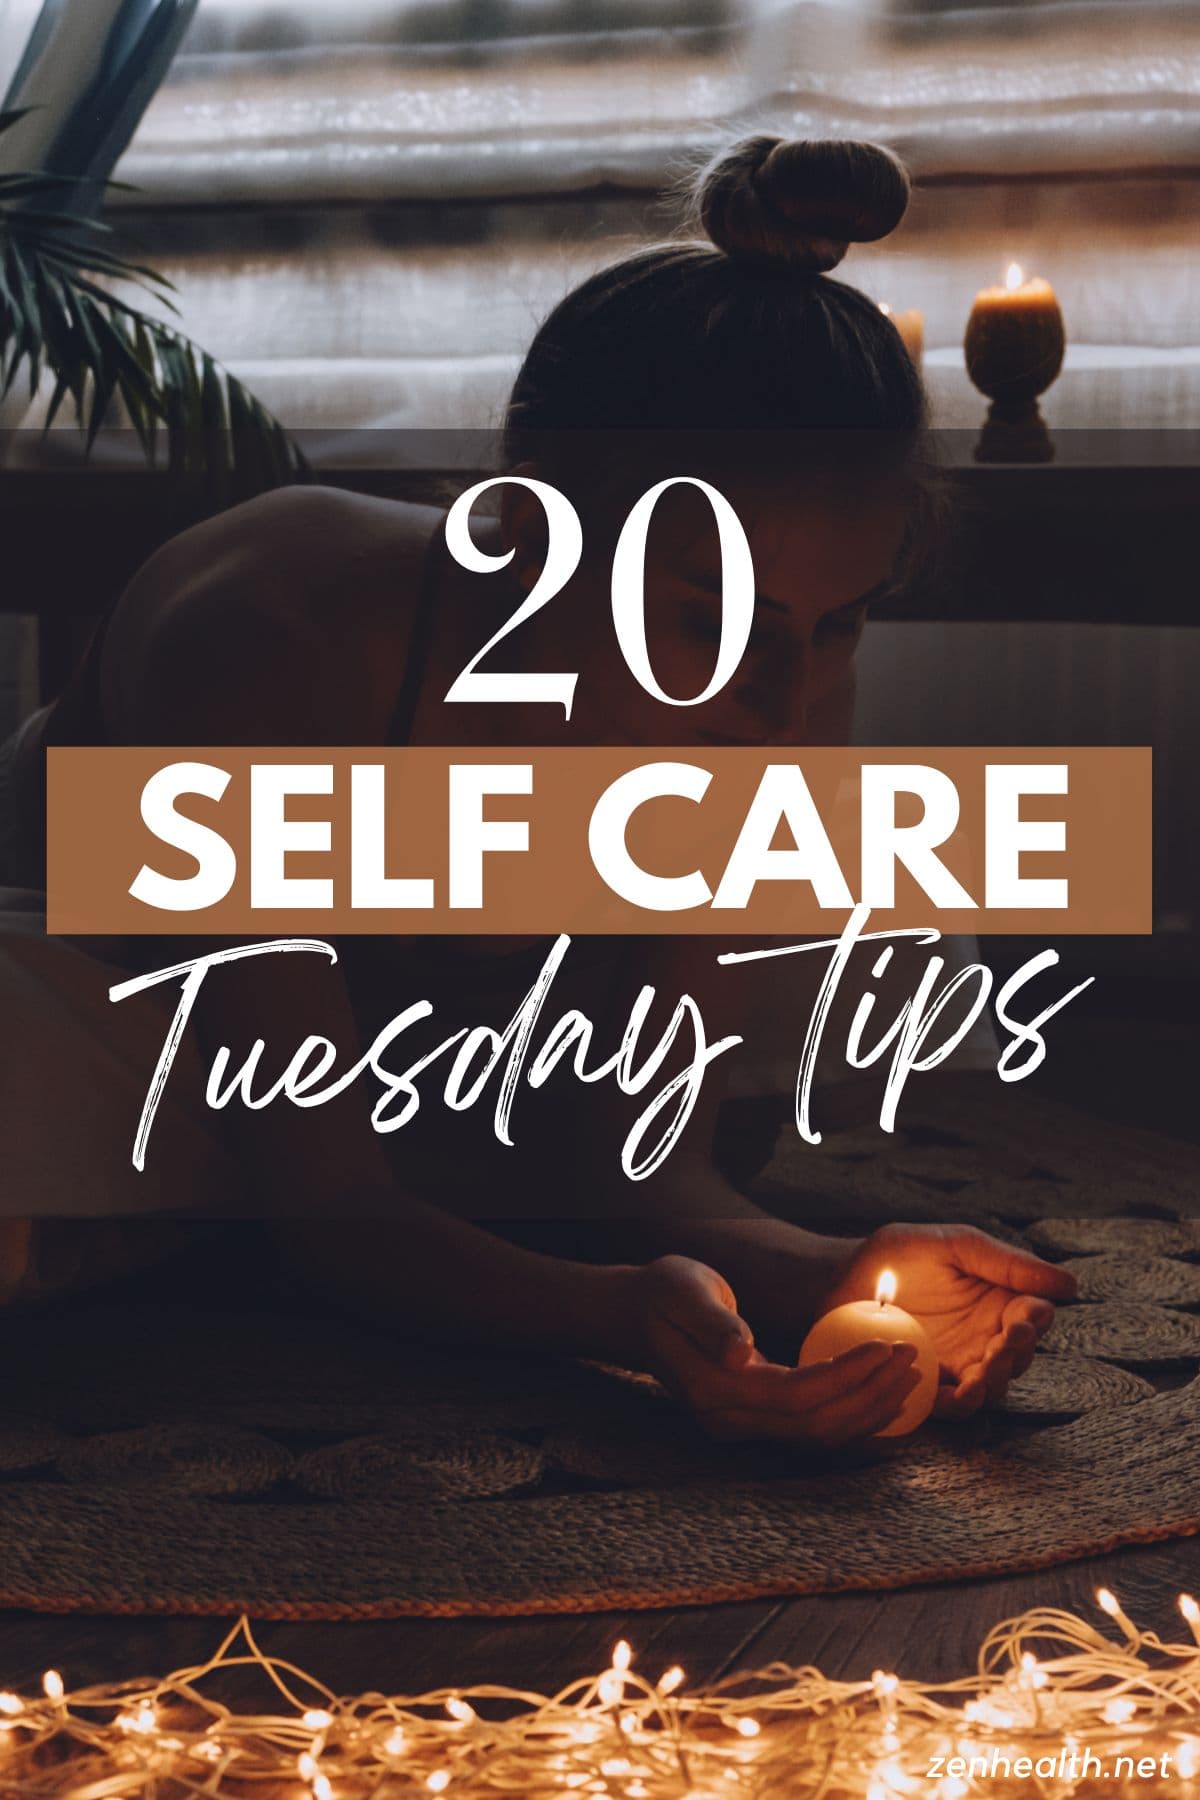 20 self care Tuesday tips text overlay on a photo of a woman sitting on the floor with a candle between her palms and fairy lights next to her